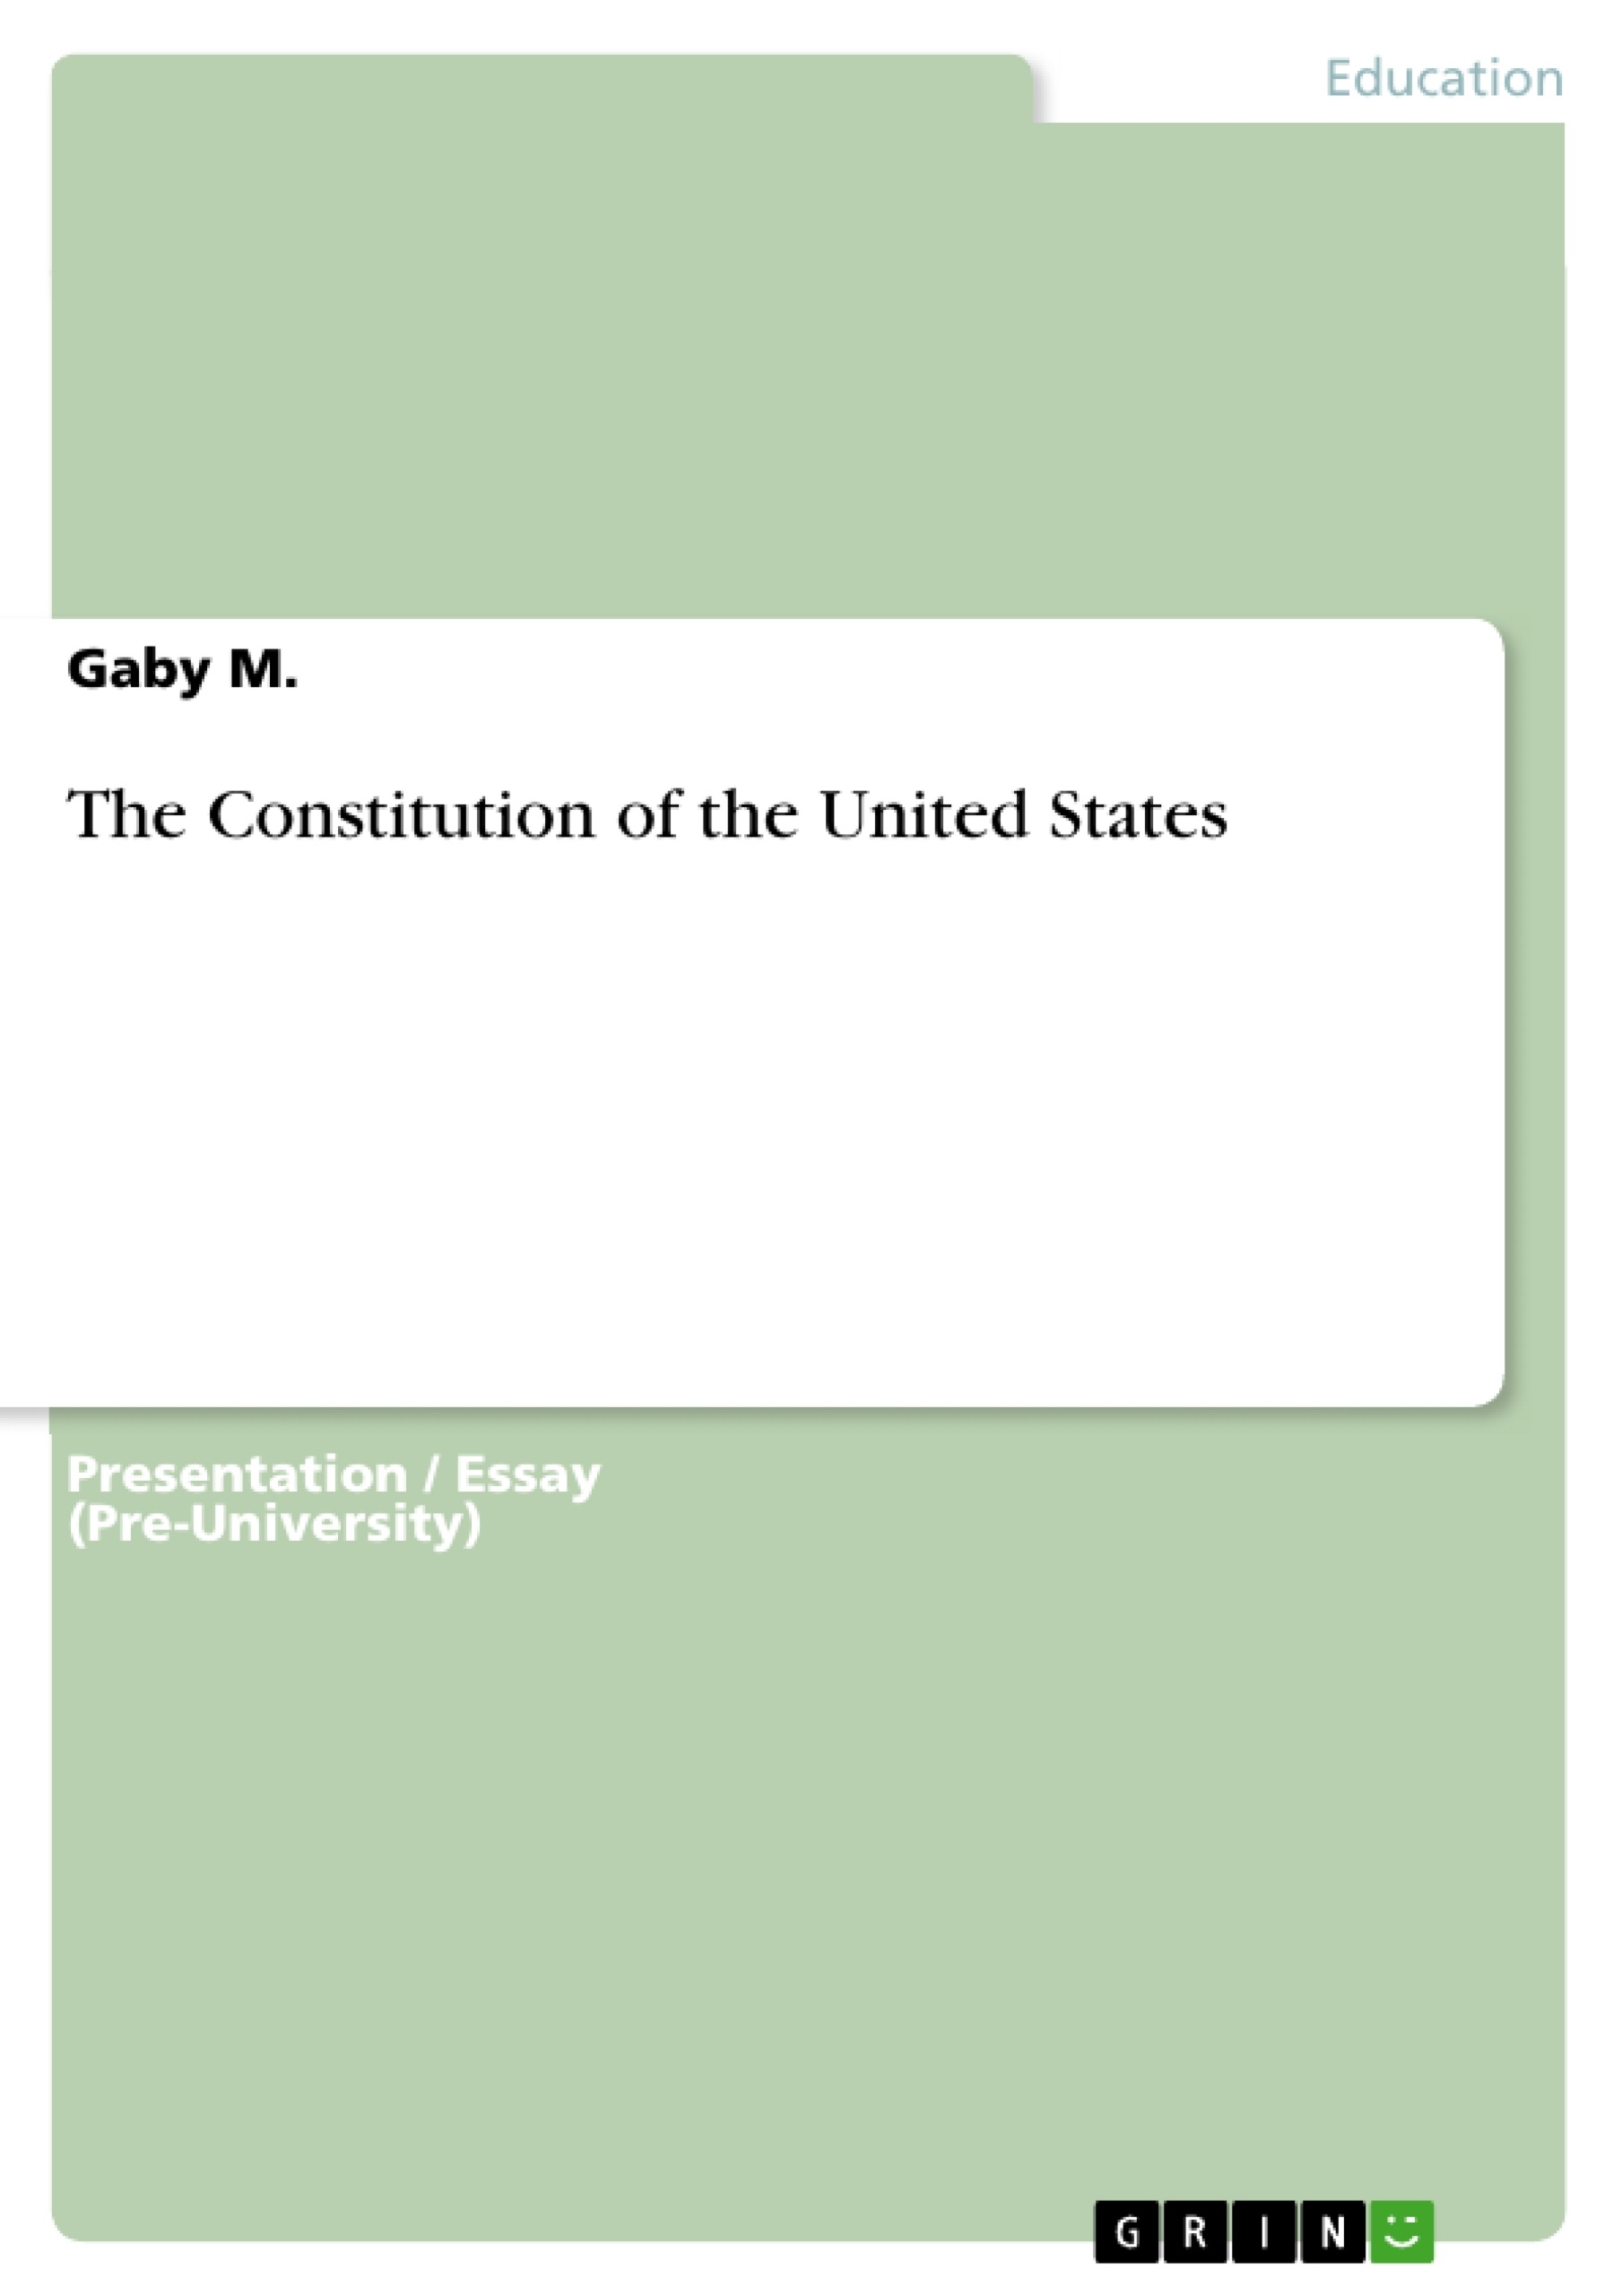 Title: The Constitution of the United States